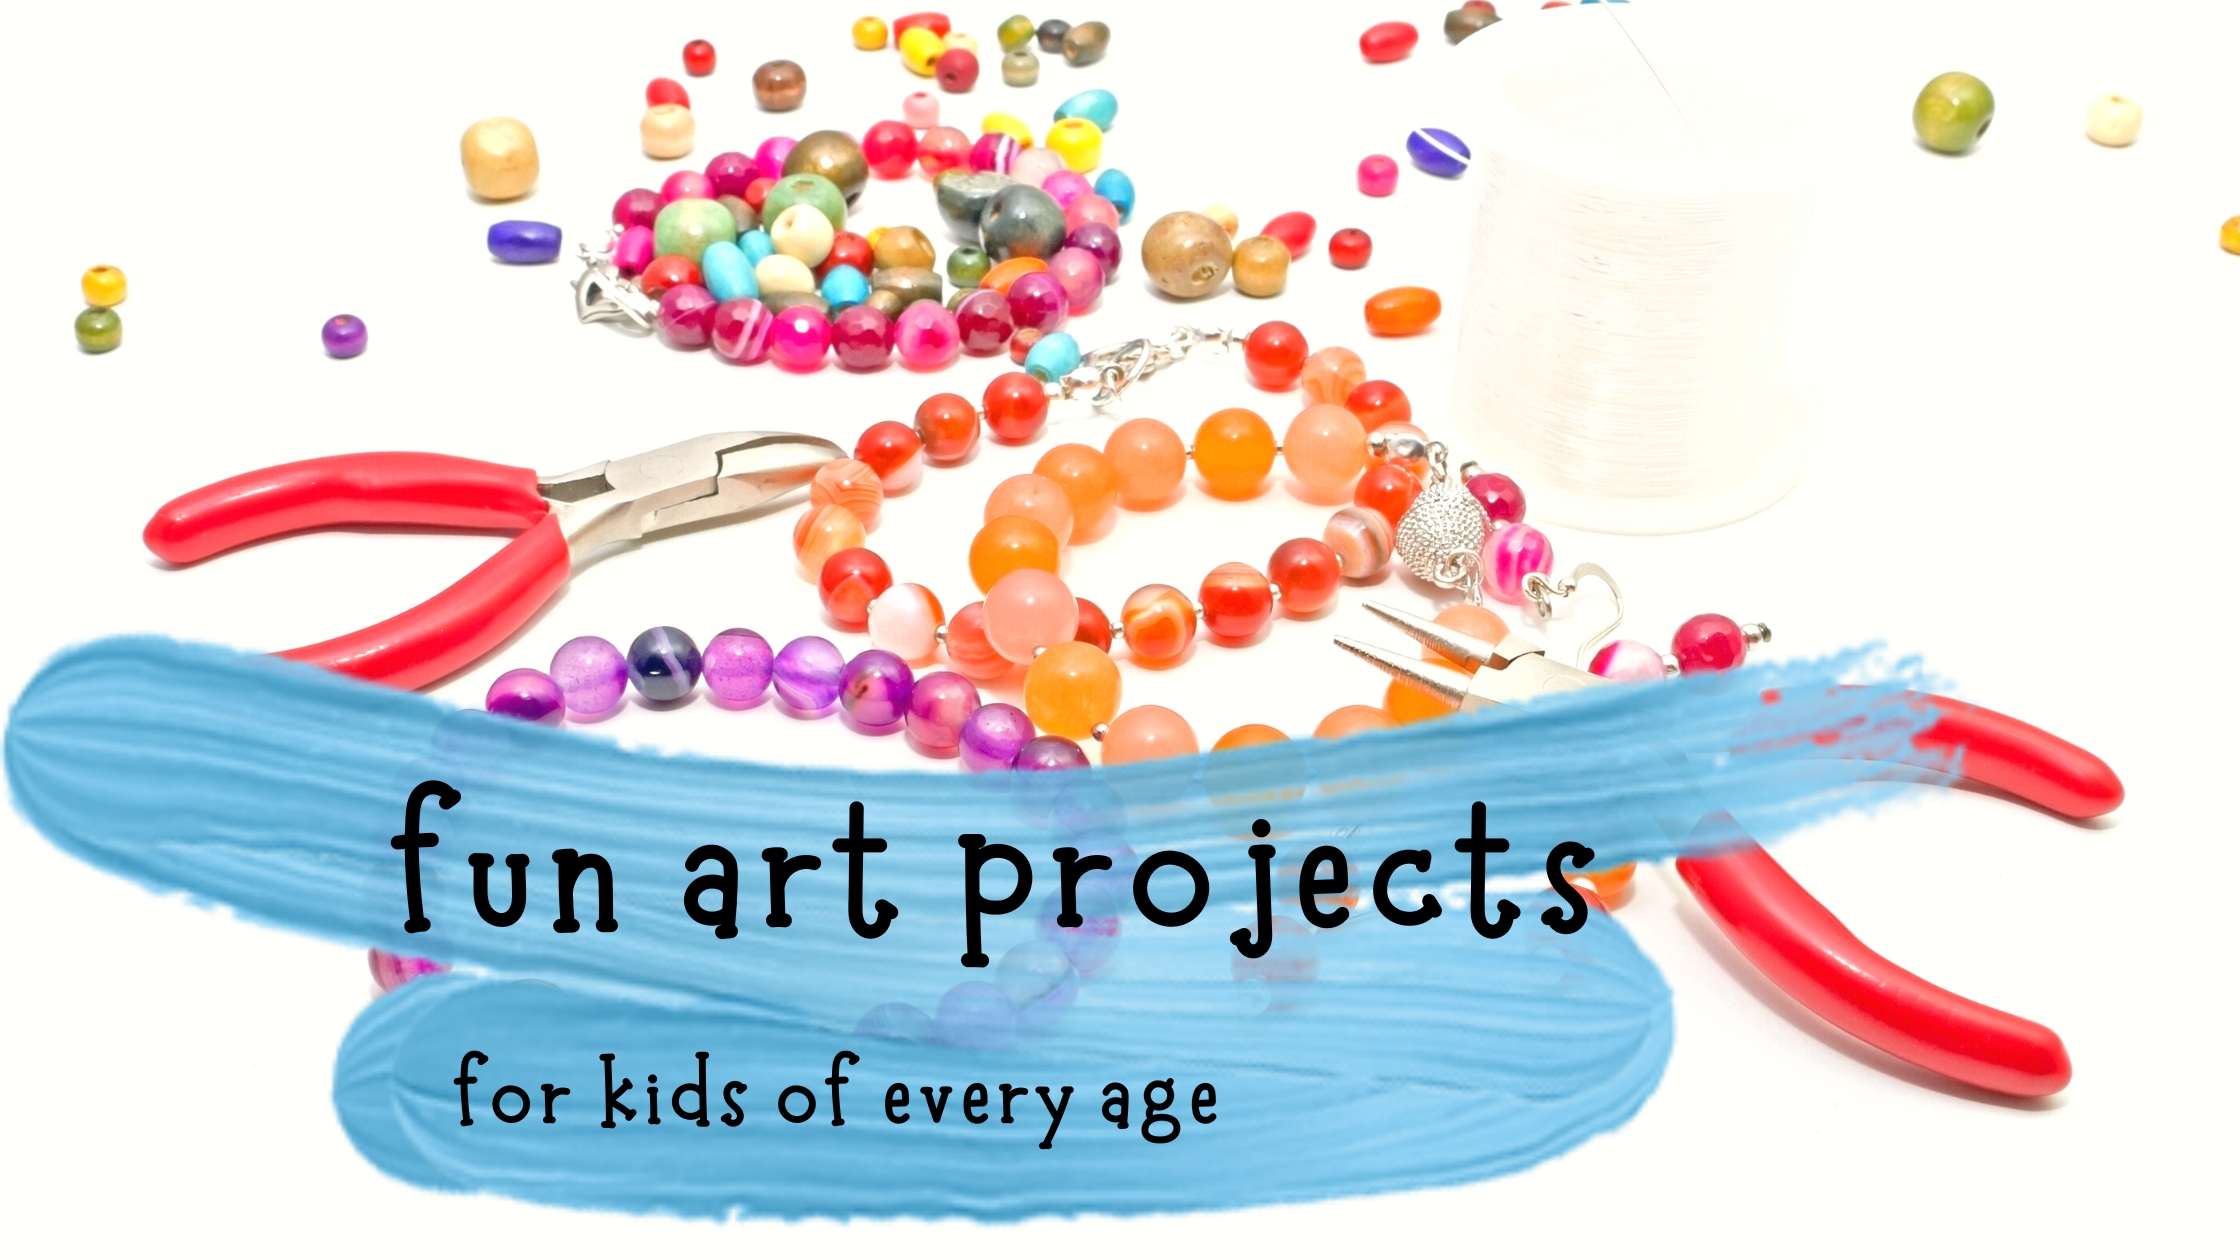 fun art projects for kids, art projects for kids, art projects